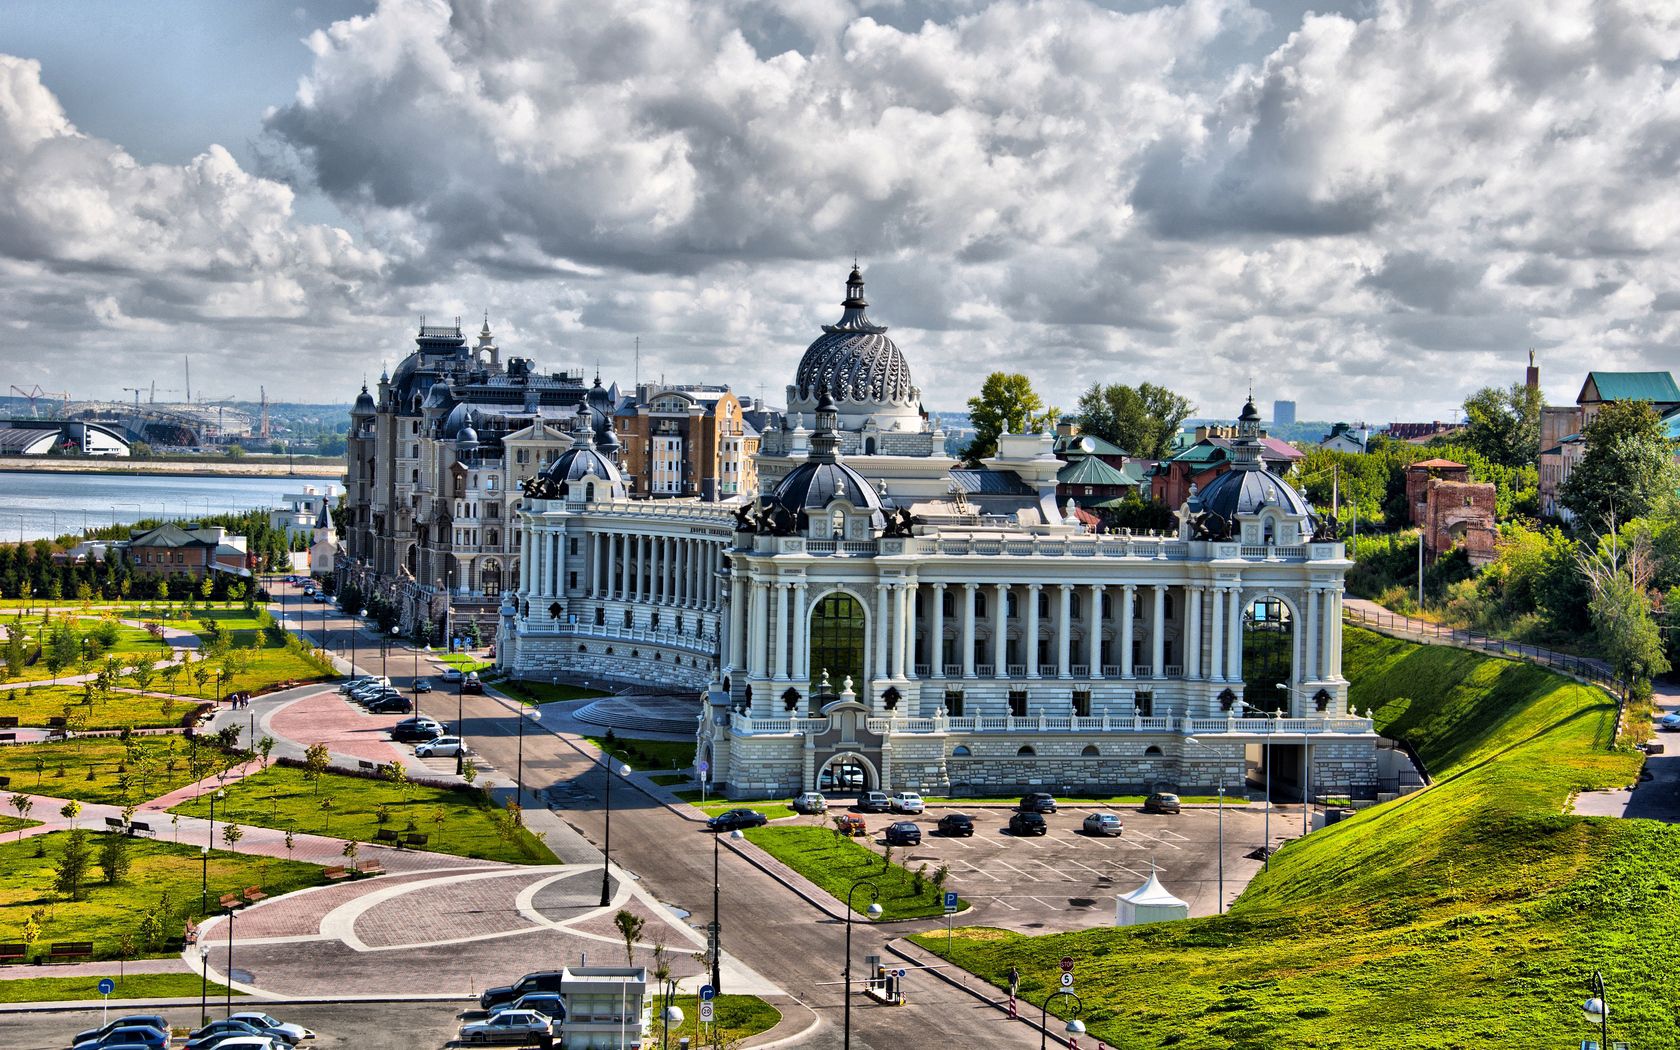 cities, handsomely, architecture, city, it's beautiful, kazan